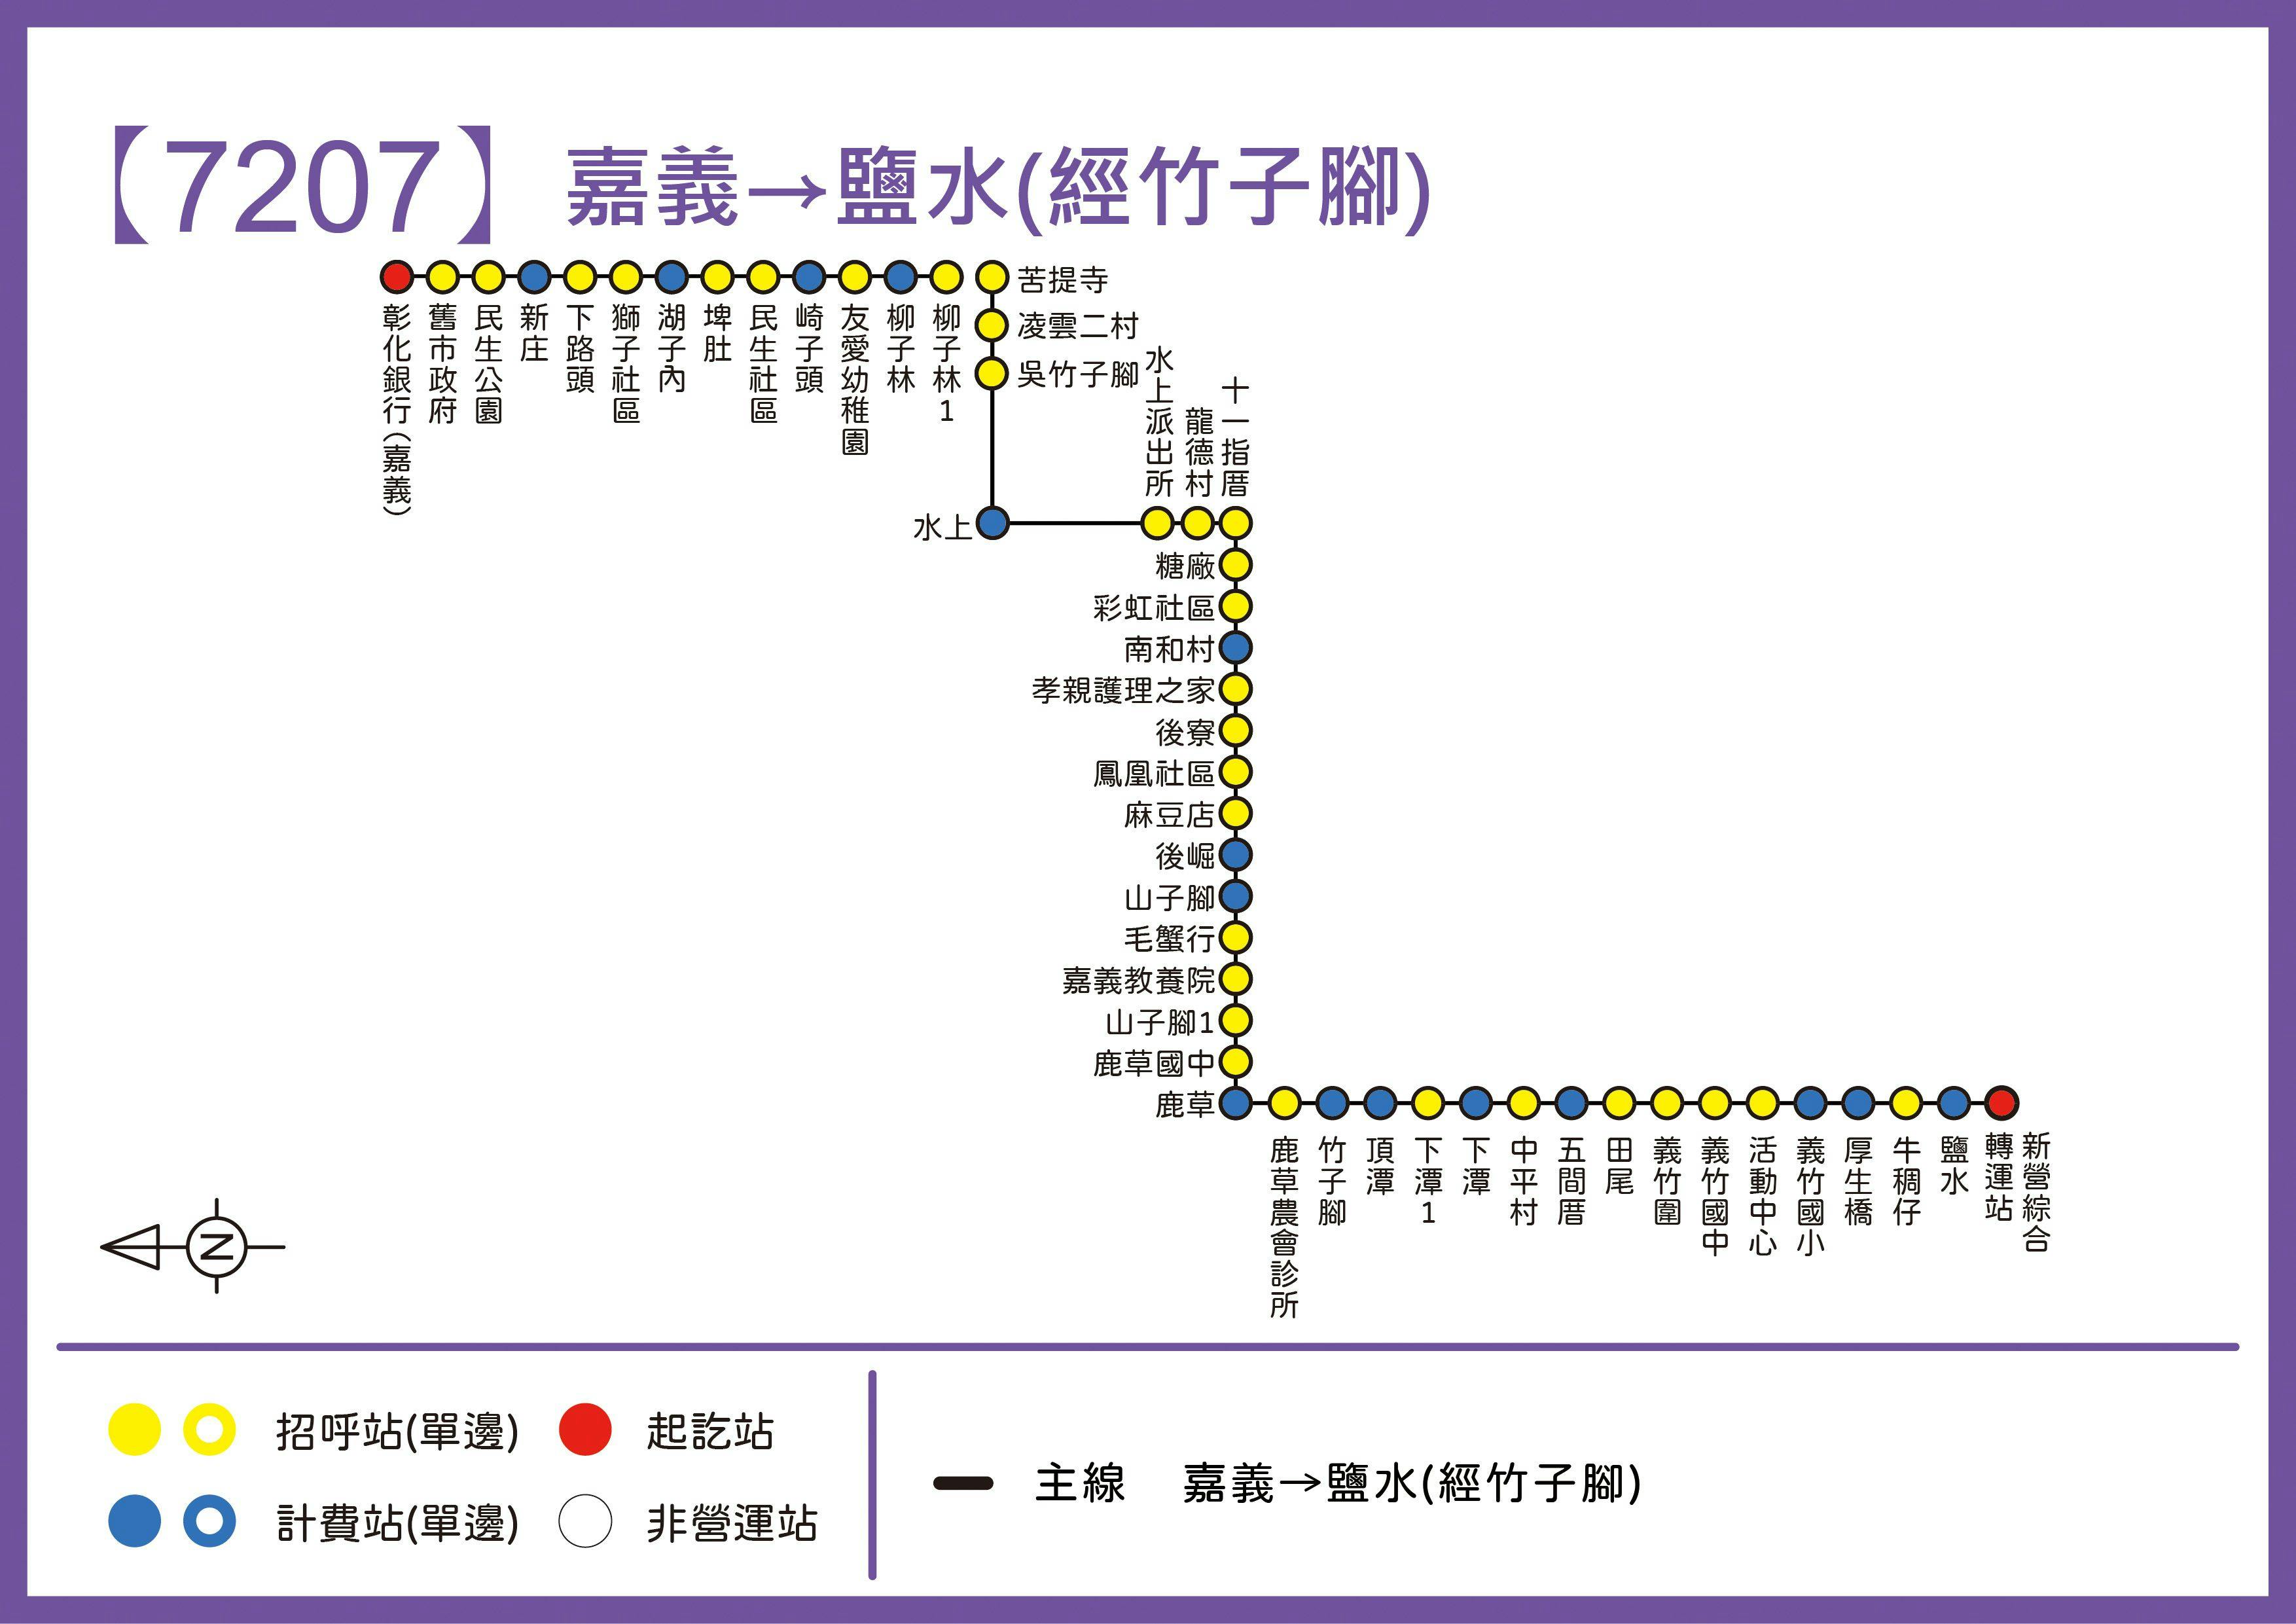 7207Route Map-Chiayi Bus